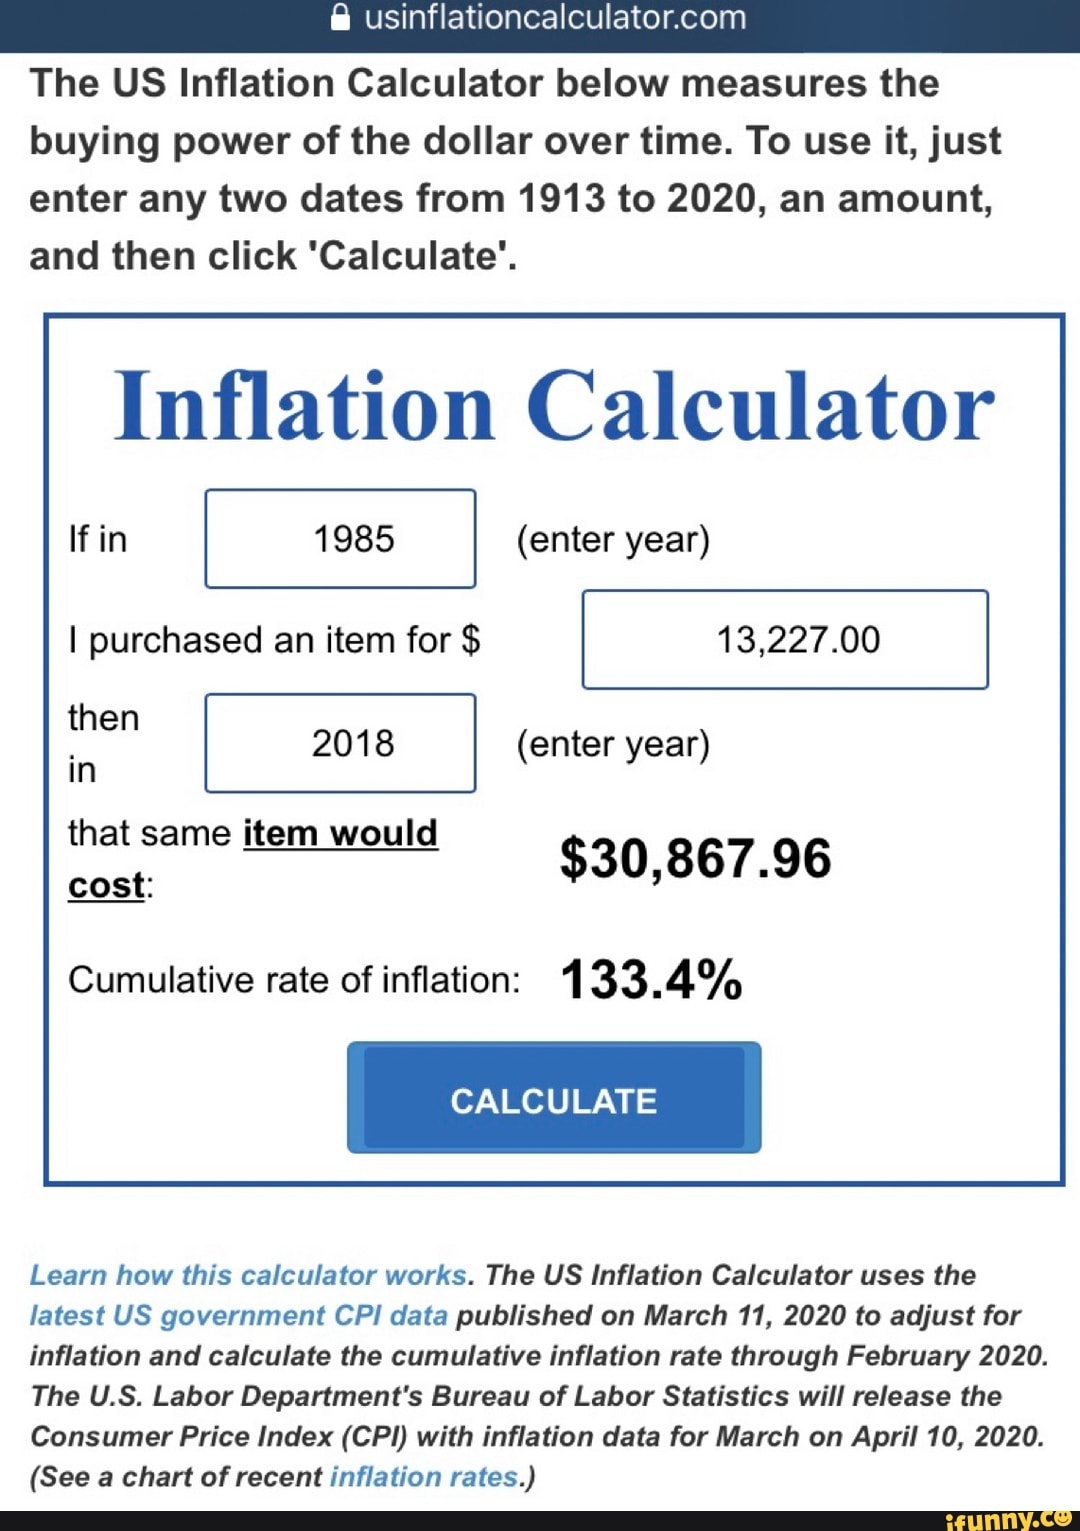 usinflationcalculator-the-us-inflation-calculator-below-measures-the-buying-power-of-the